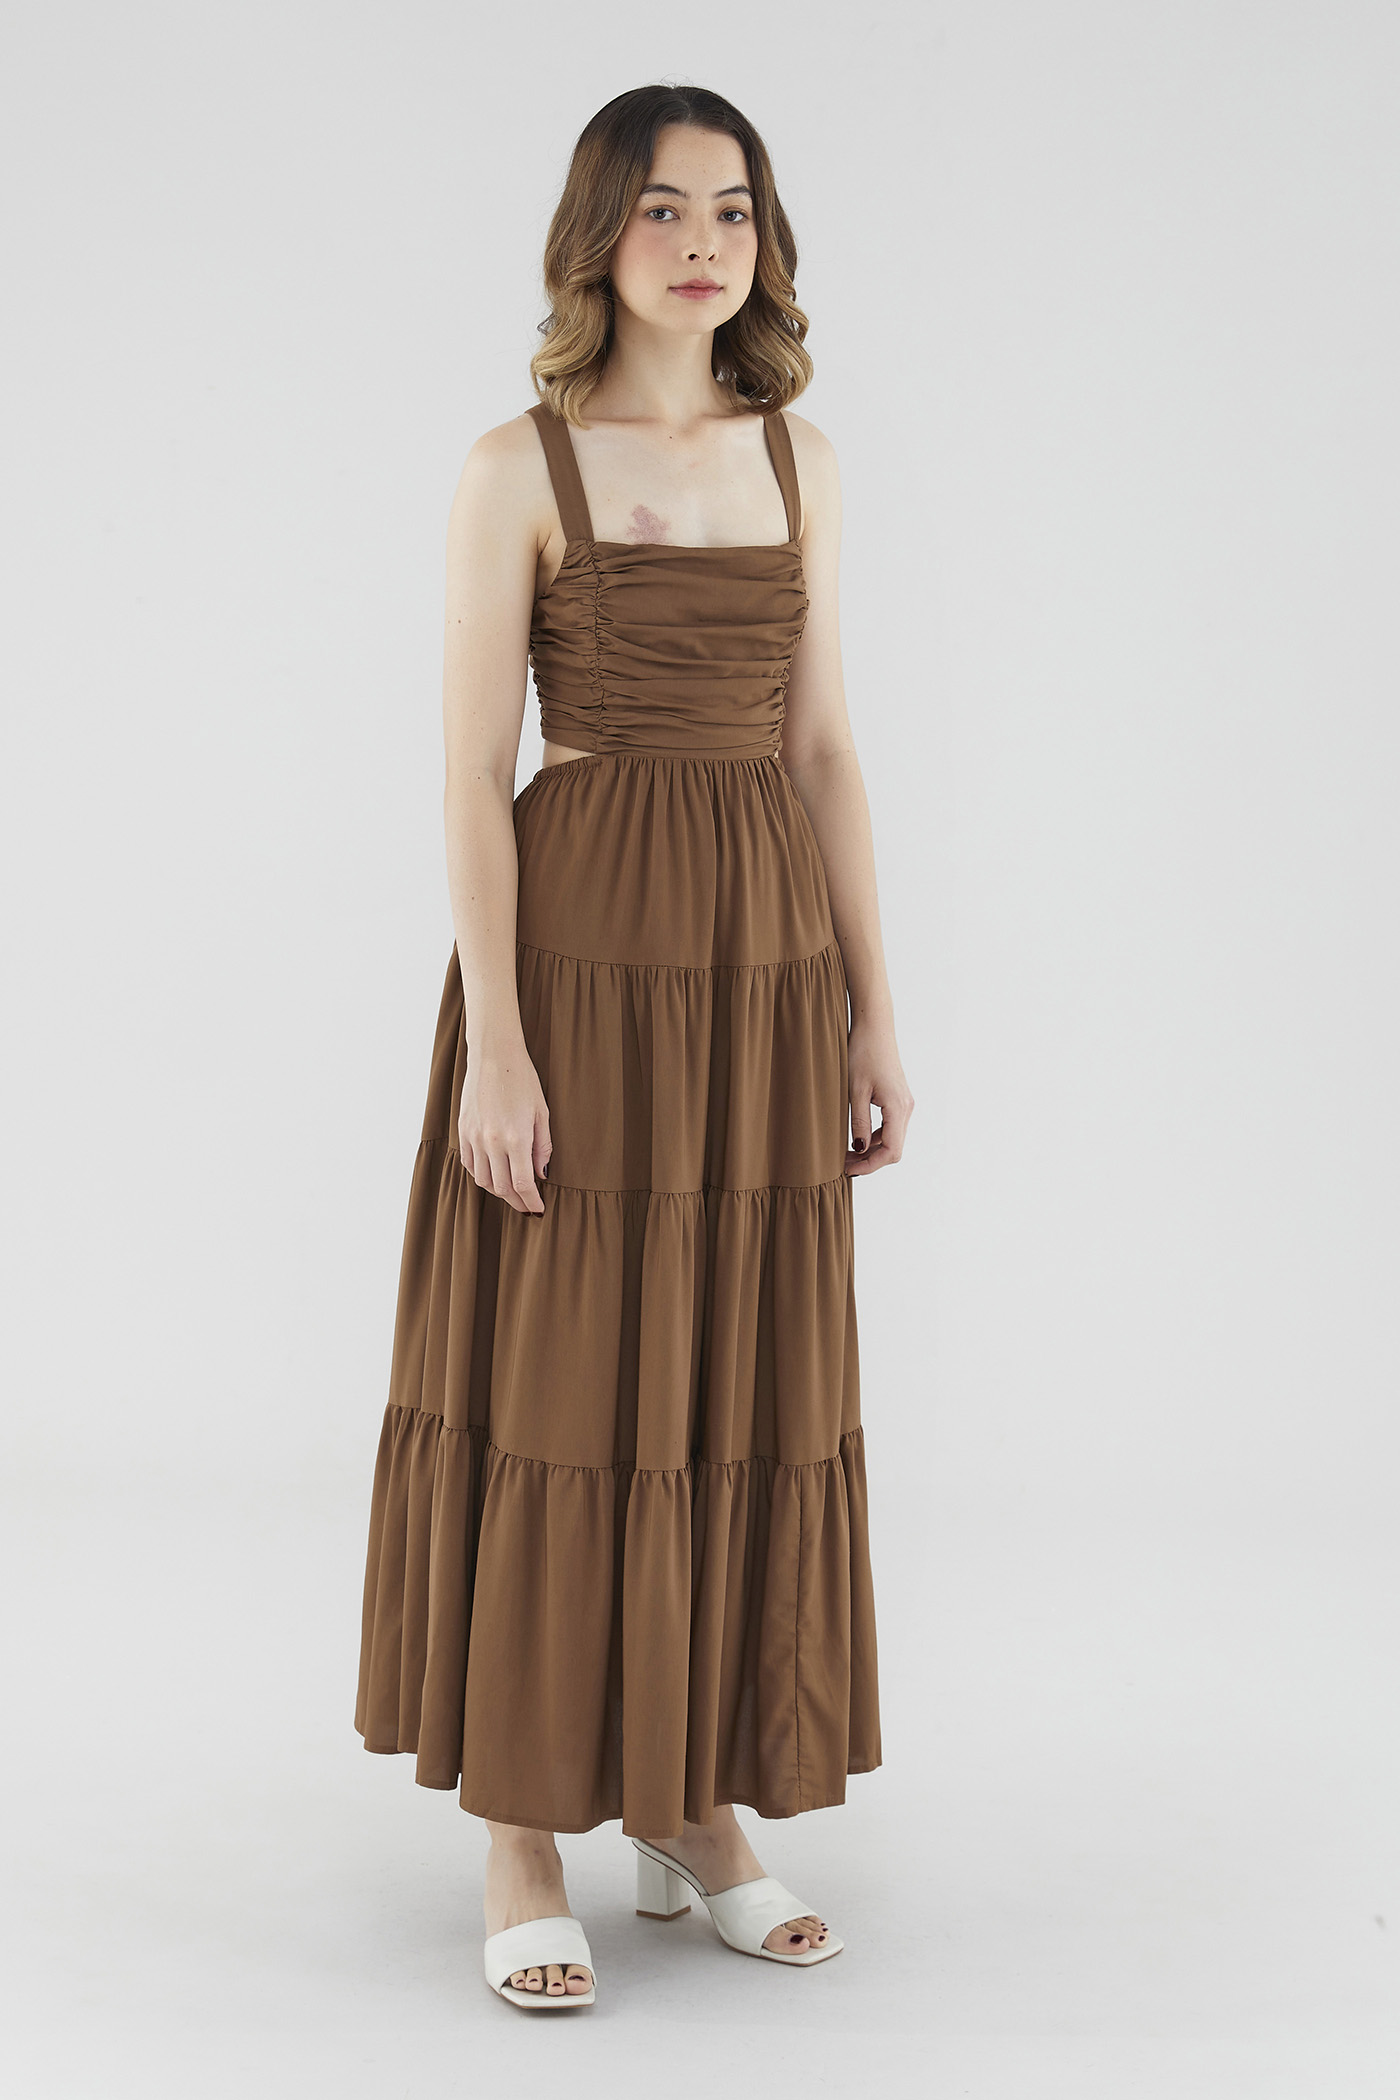 Rust Elastic Empire Waist Maxi Dress, Flat Chested Outfits